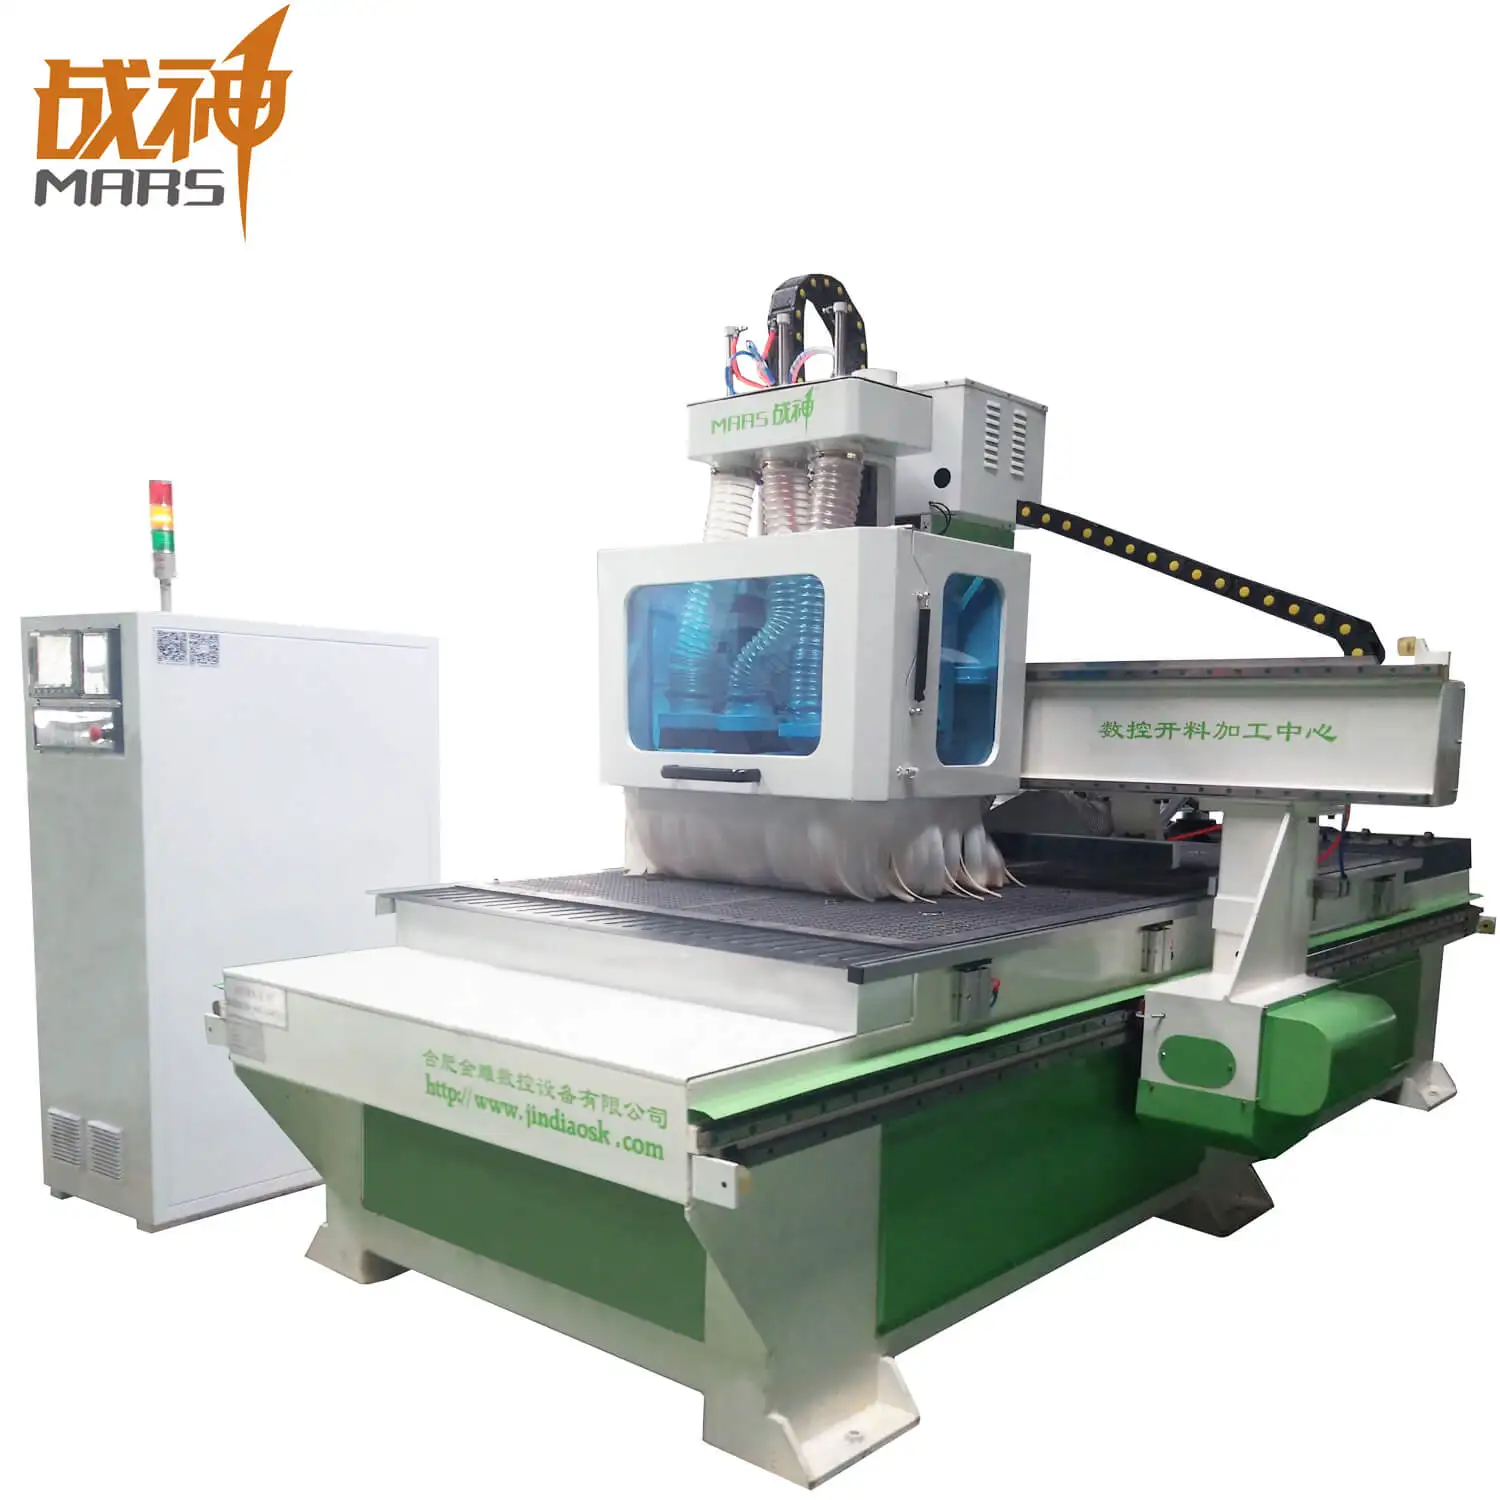 Five Axis Wooden Door Machining Center CNC Woodworking Routers For Sale